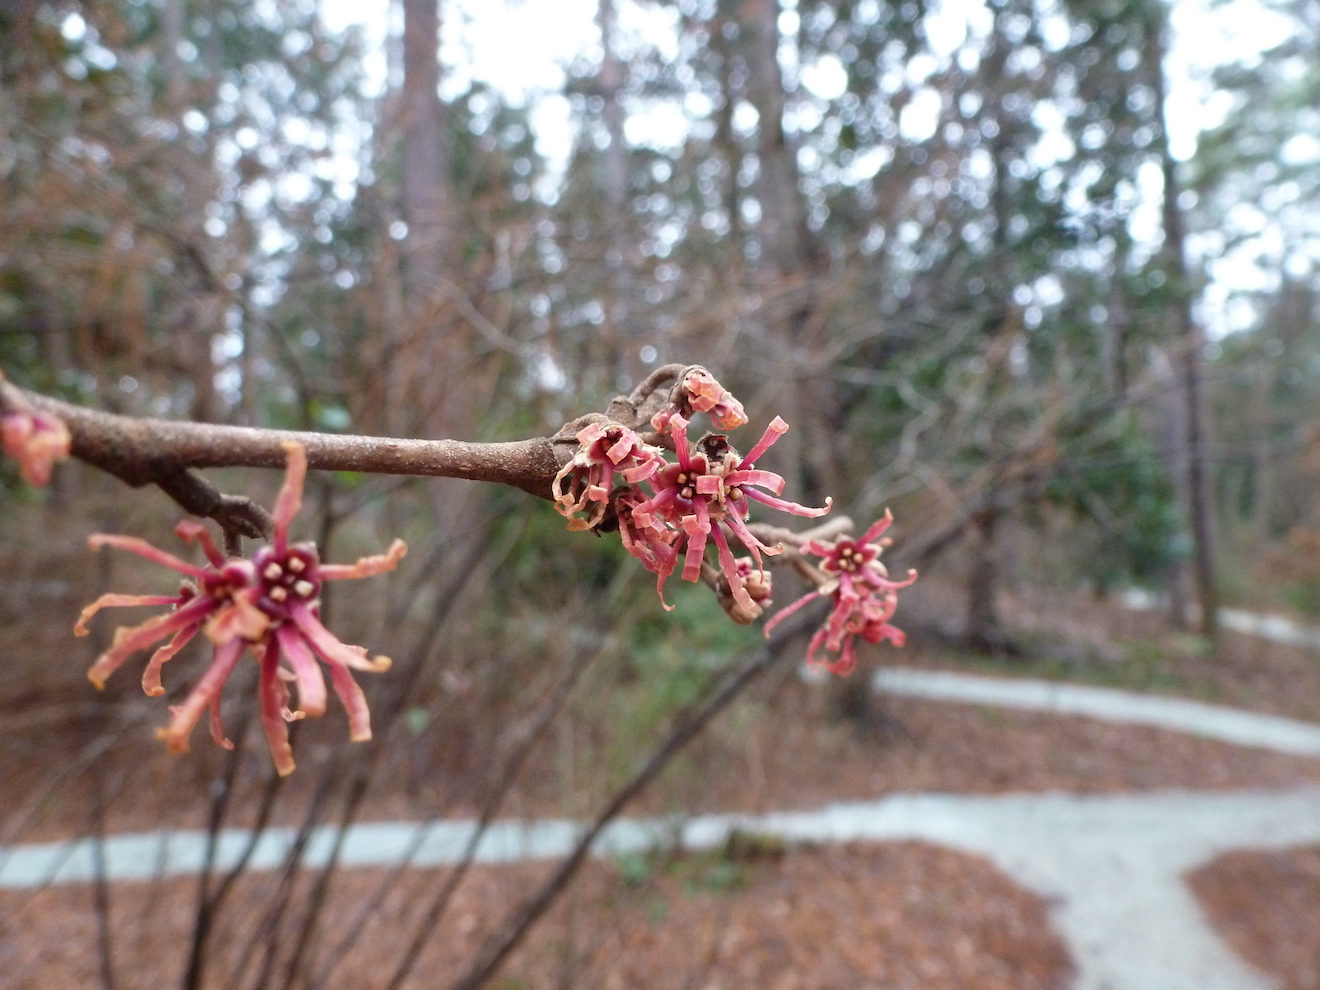 The Scientific Name is Hamamelis vernalis. You will likely hear them called Vernal Witchhazel, Ozark Witchhazel. This picture shows the  of Hamamelis vernalis